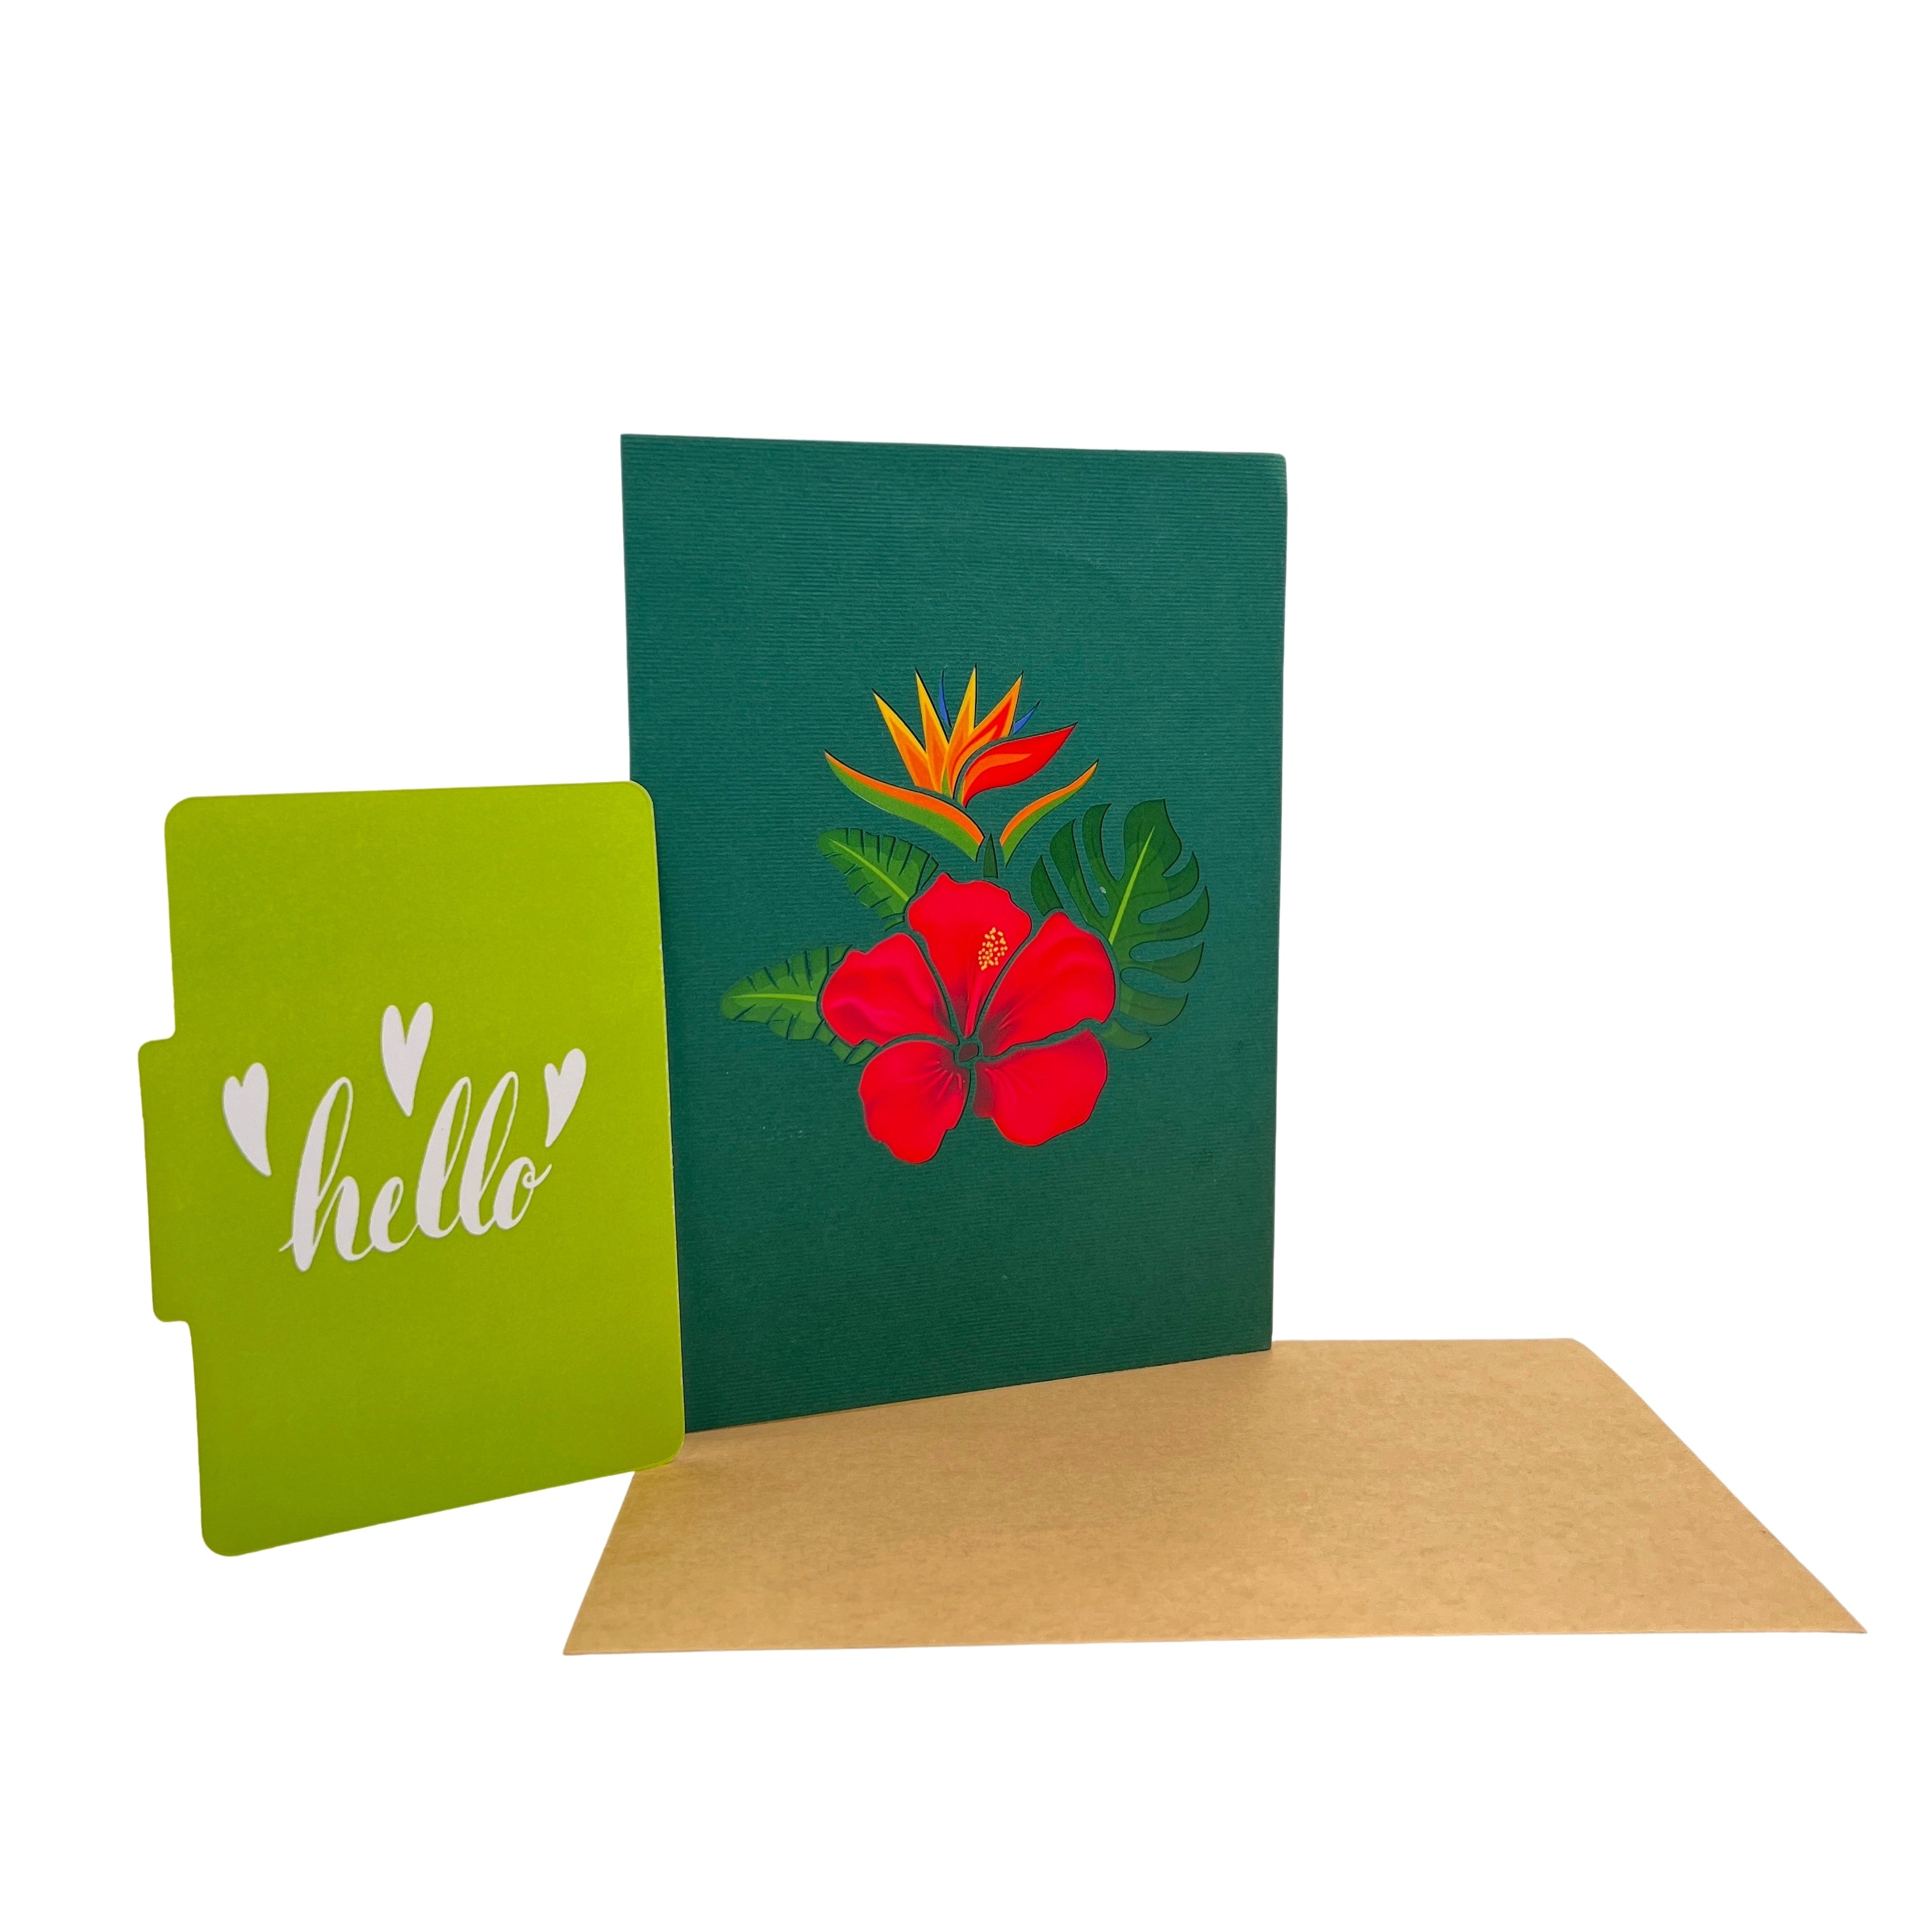 Pop Up Greeting Card Blooming Red Tropical Flower Card Flower Nature Lover Thank You Birthday Card for Kid Dad Mom Family Friend Gift Idea